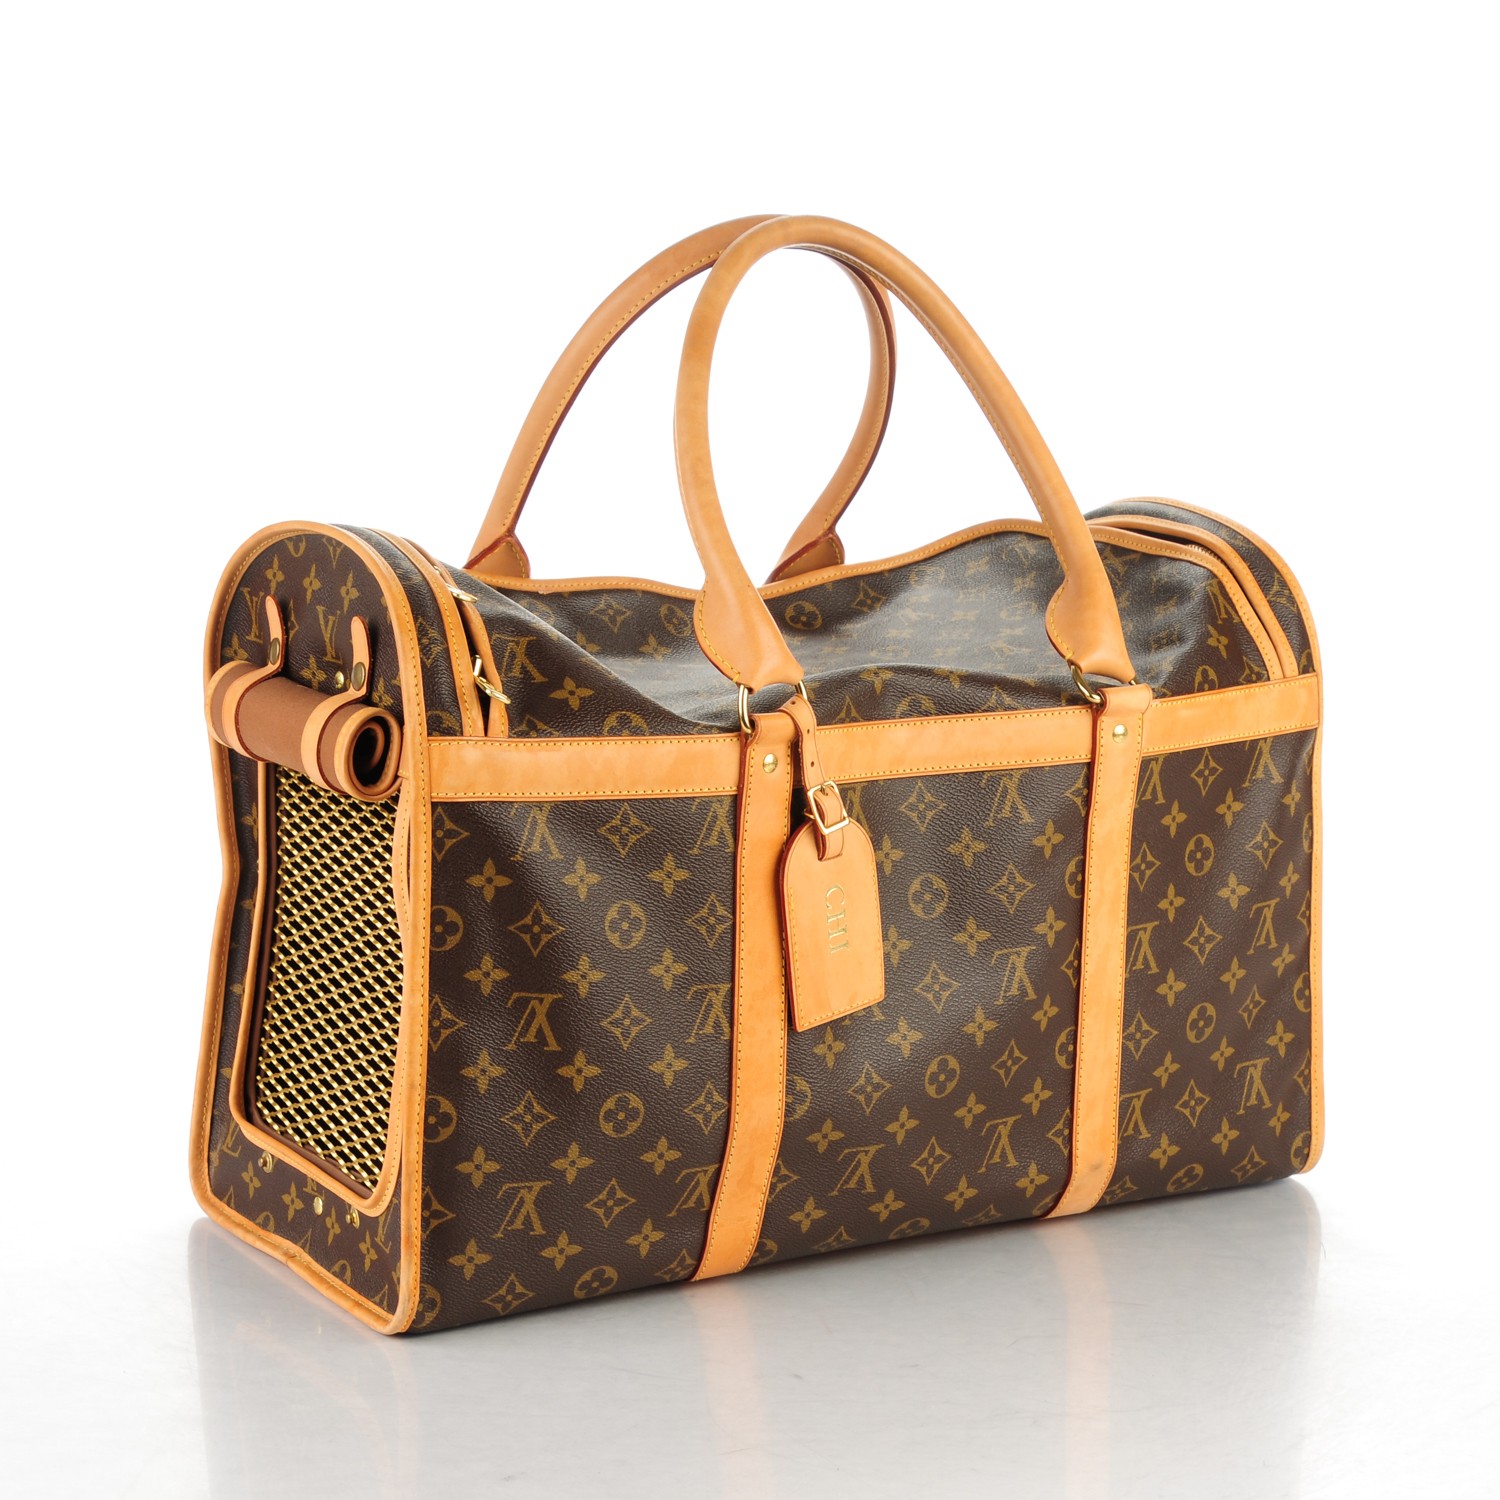 Louis Vuitton Dog bag in Monogram canvas and leather Dark brown